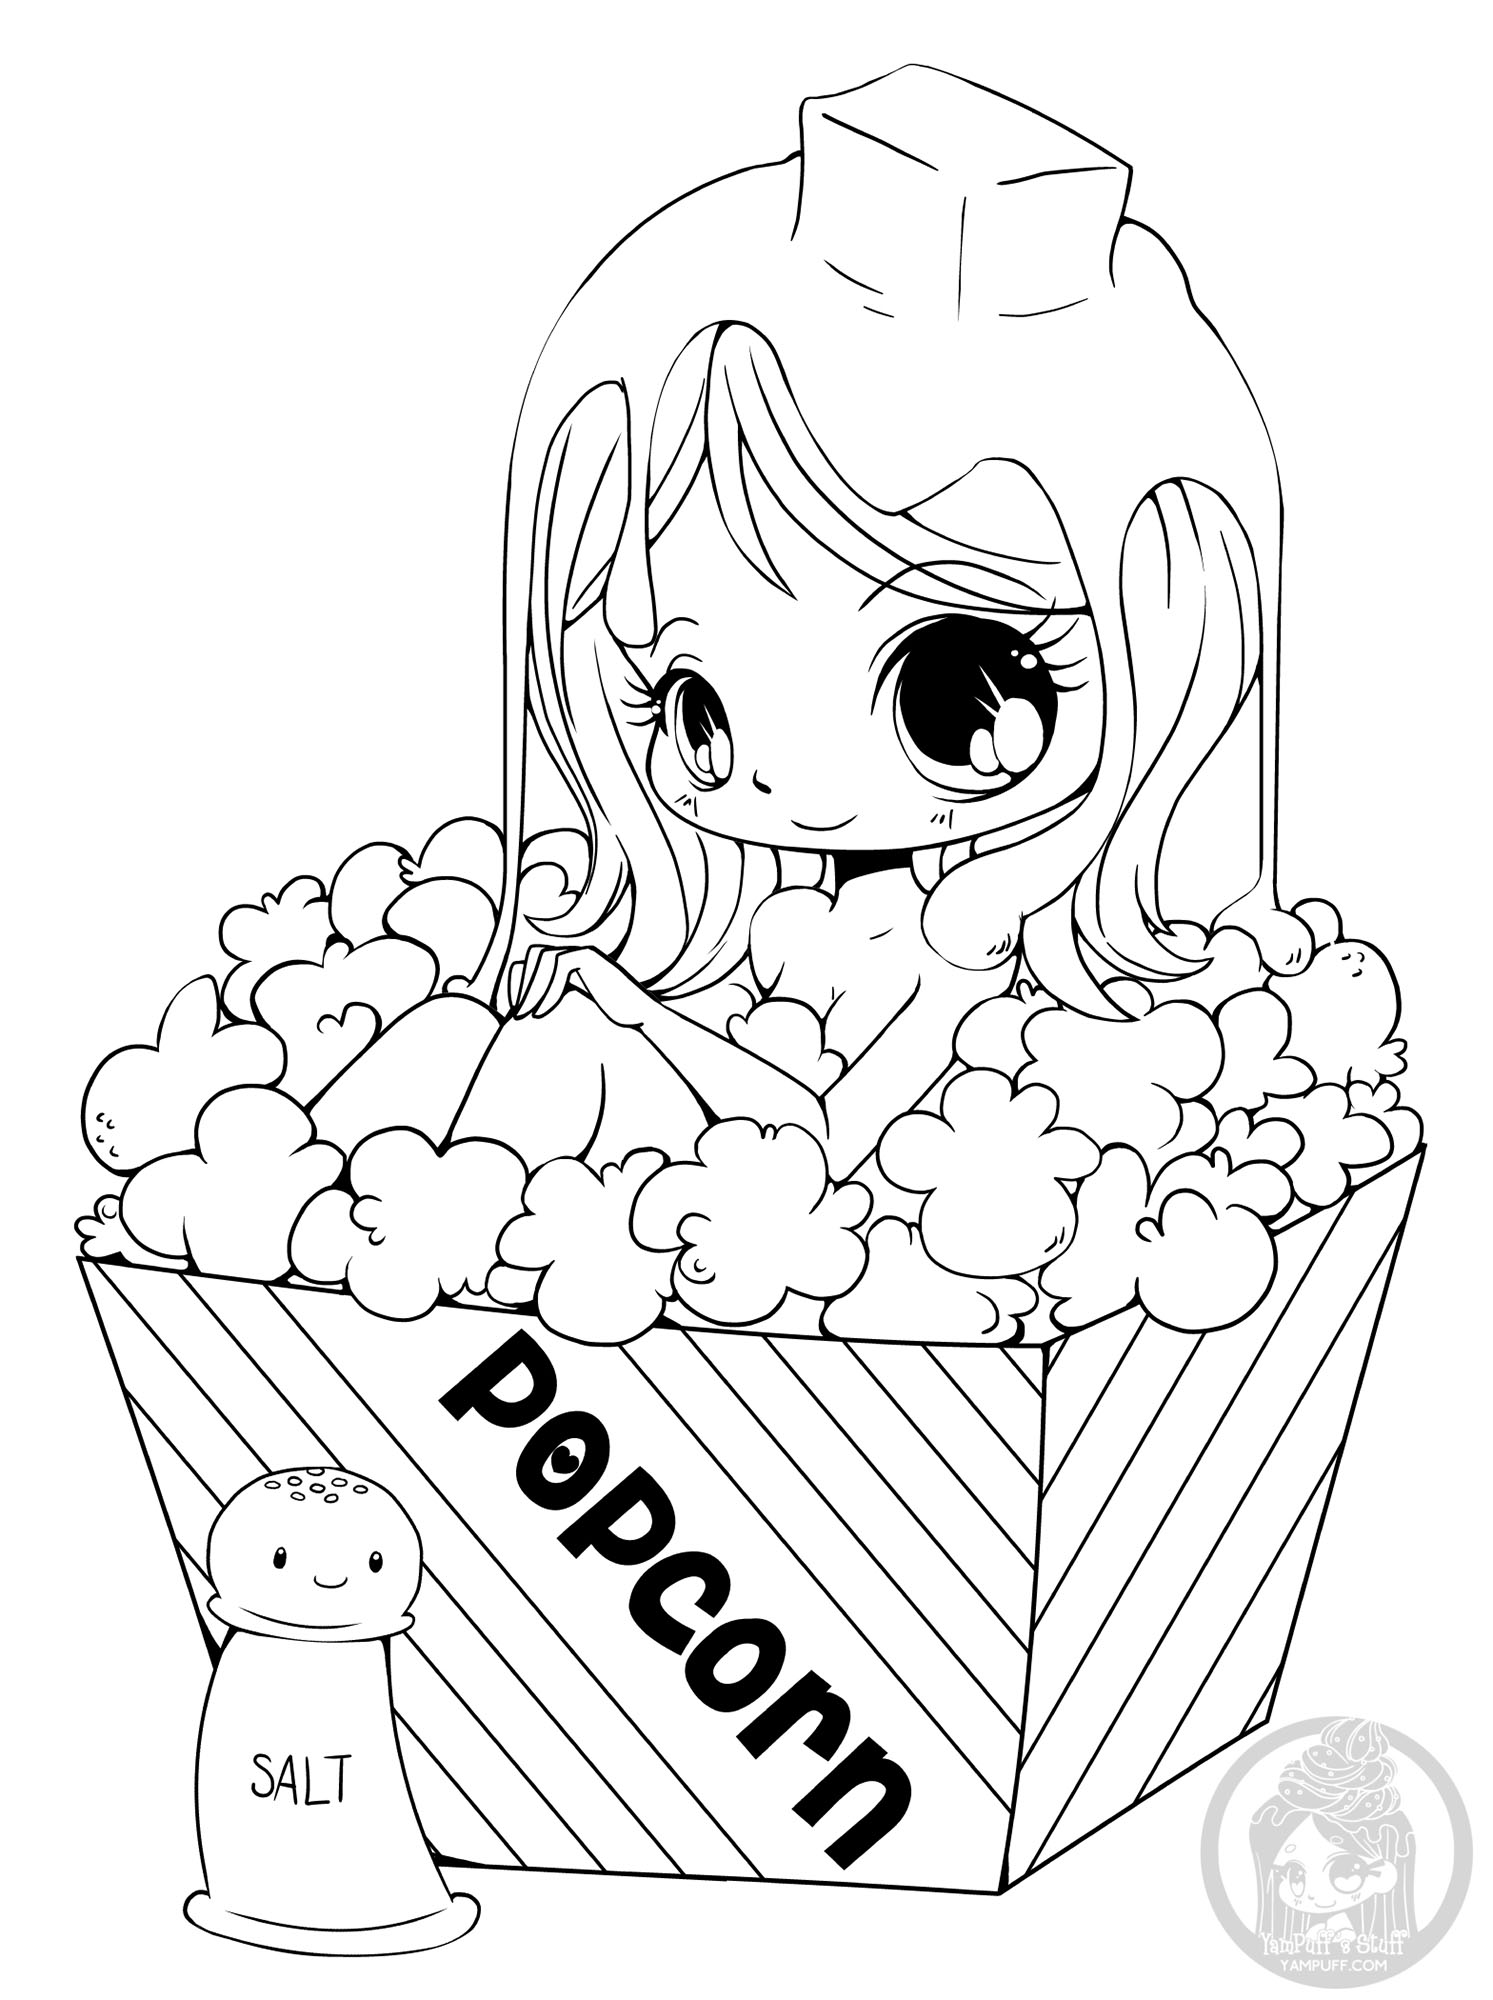 Characters Gacha Life coloring page  Coloring pages, Free printable  coloring pages, Coloring pages for kids